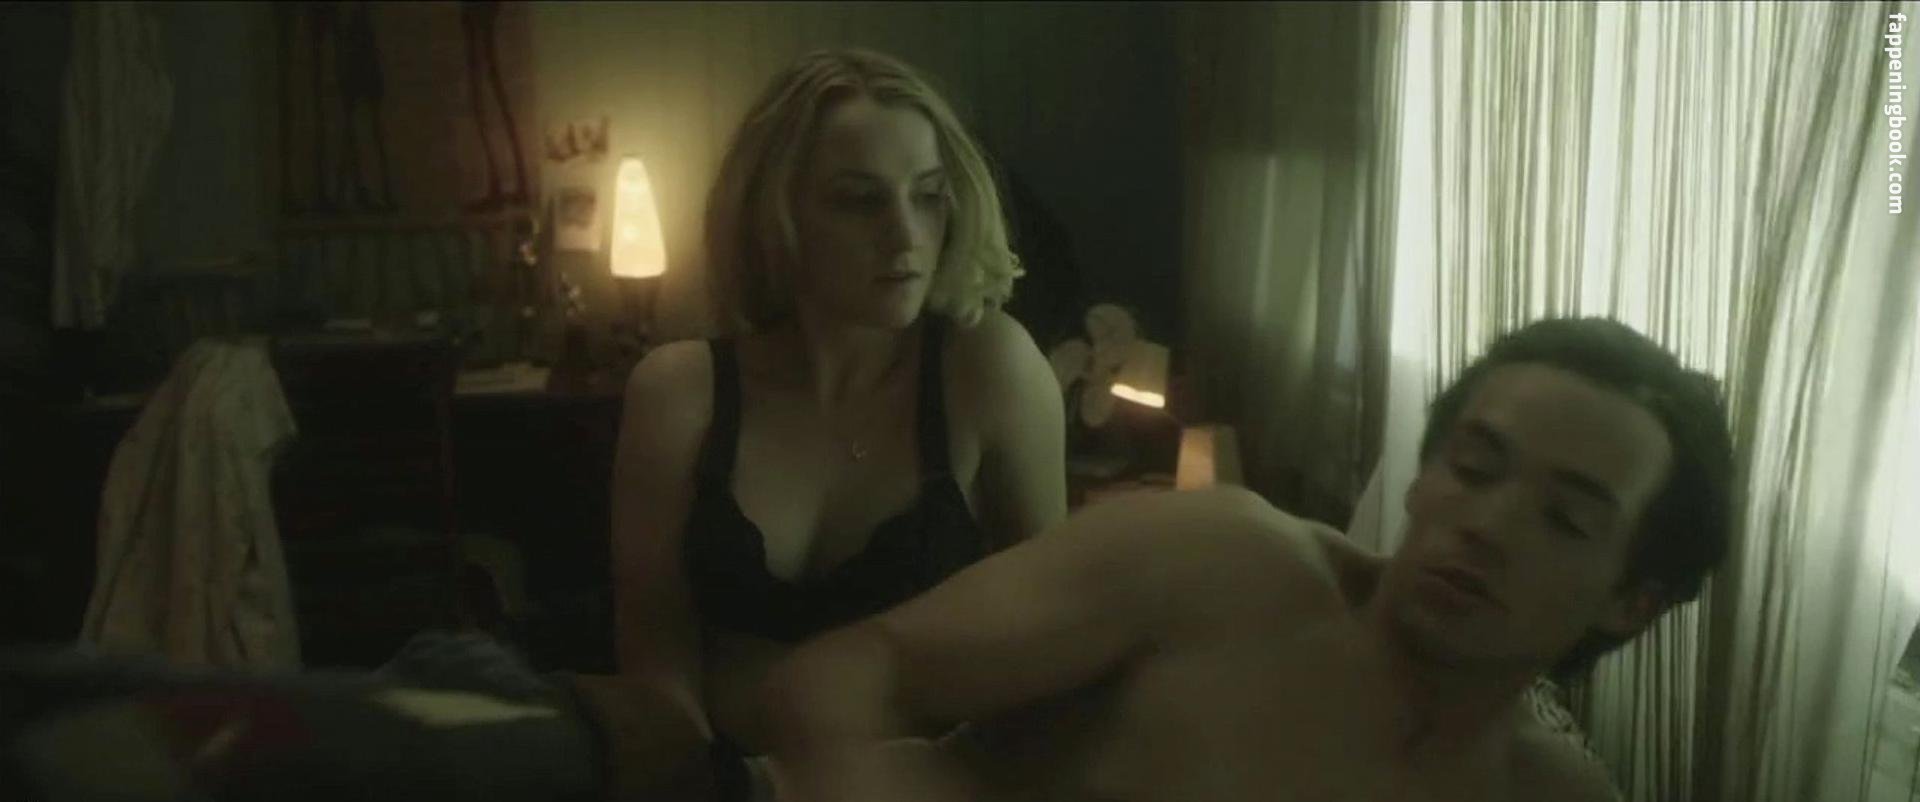 Evanna Lynch Shows Some Skin in One of Her Latest Movies